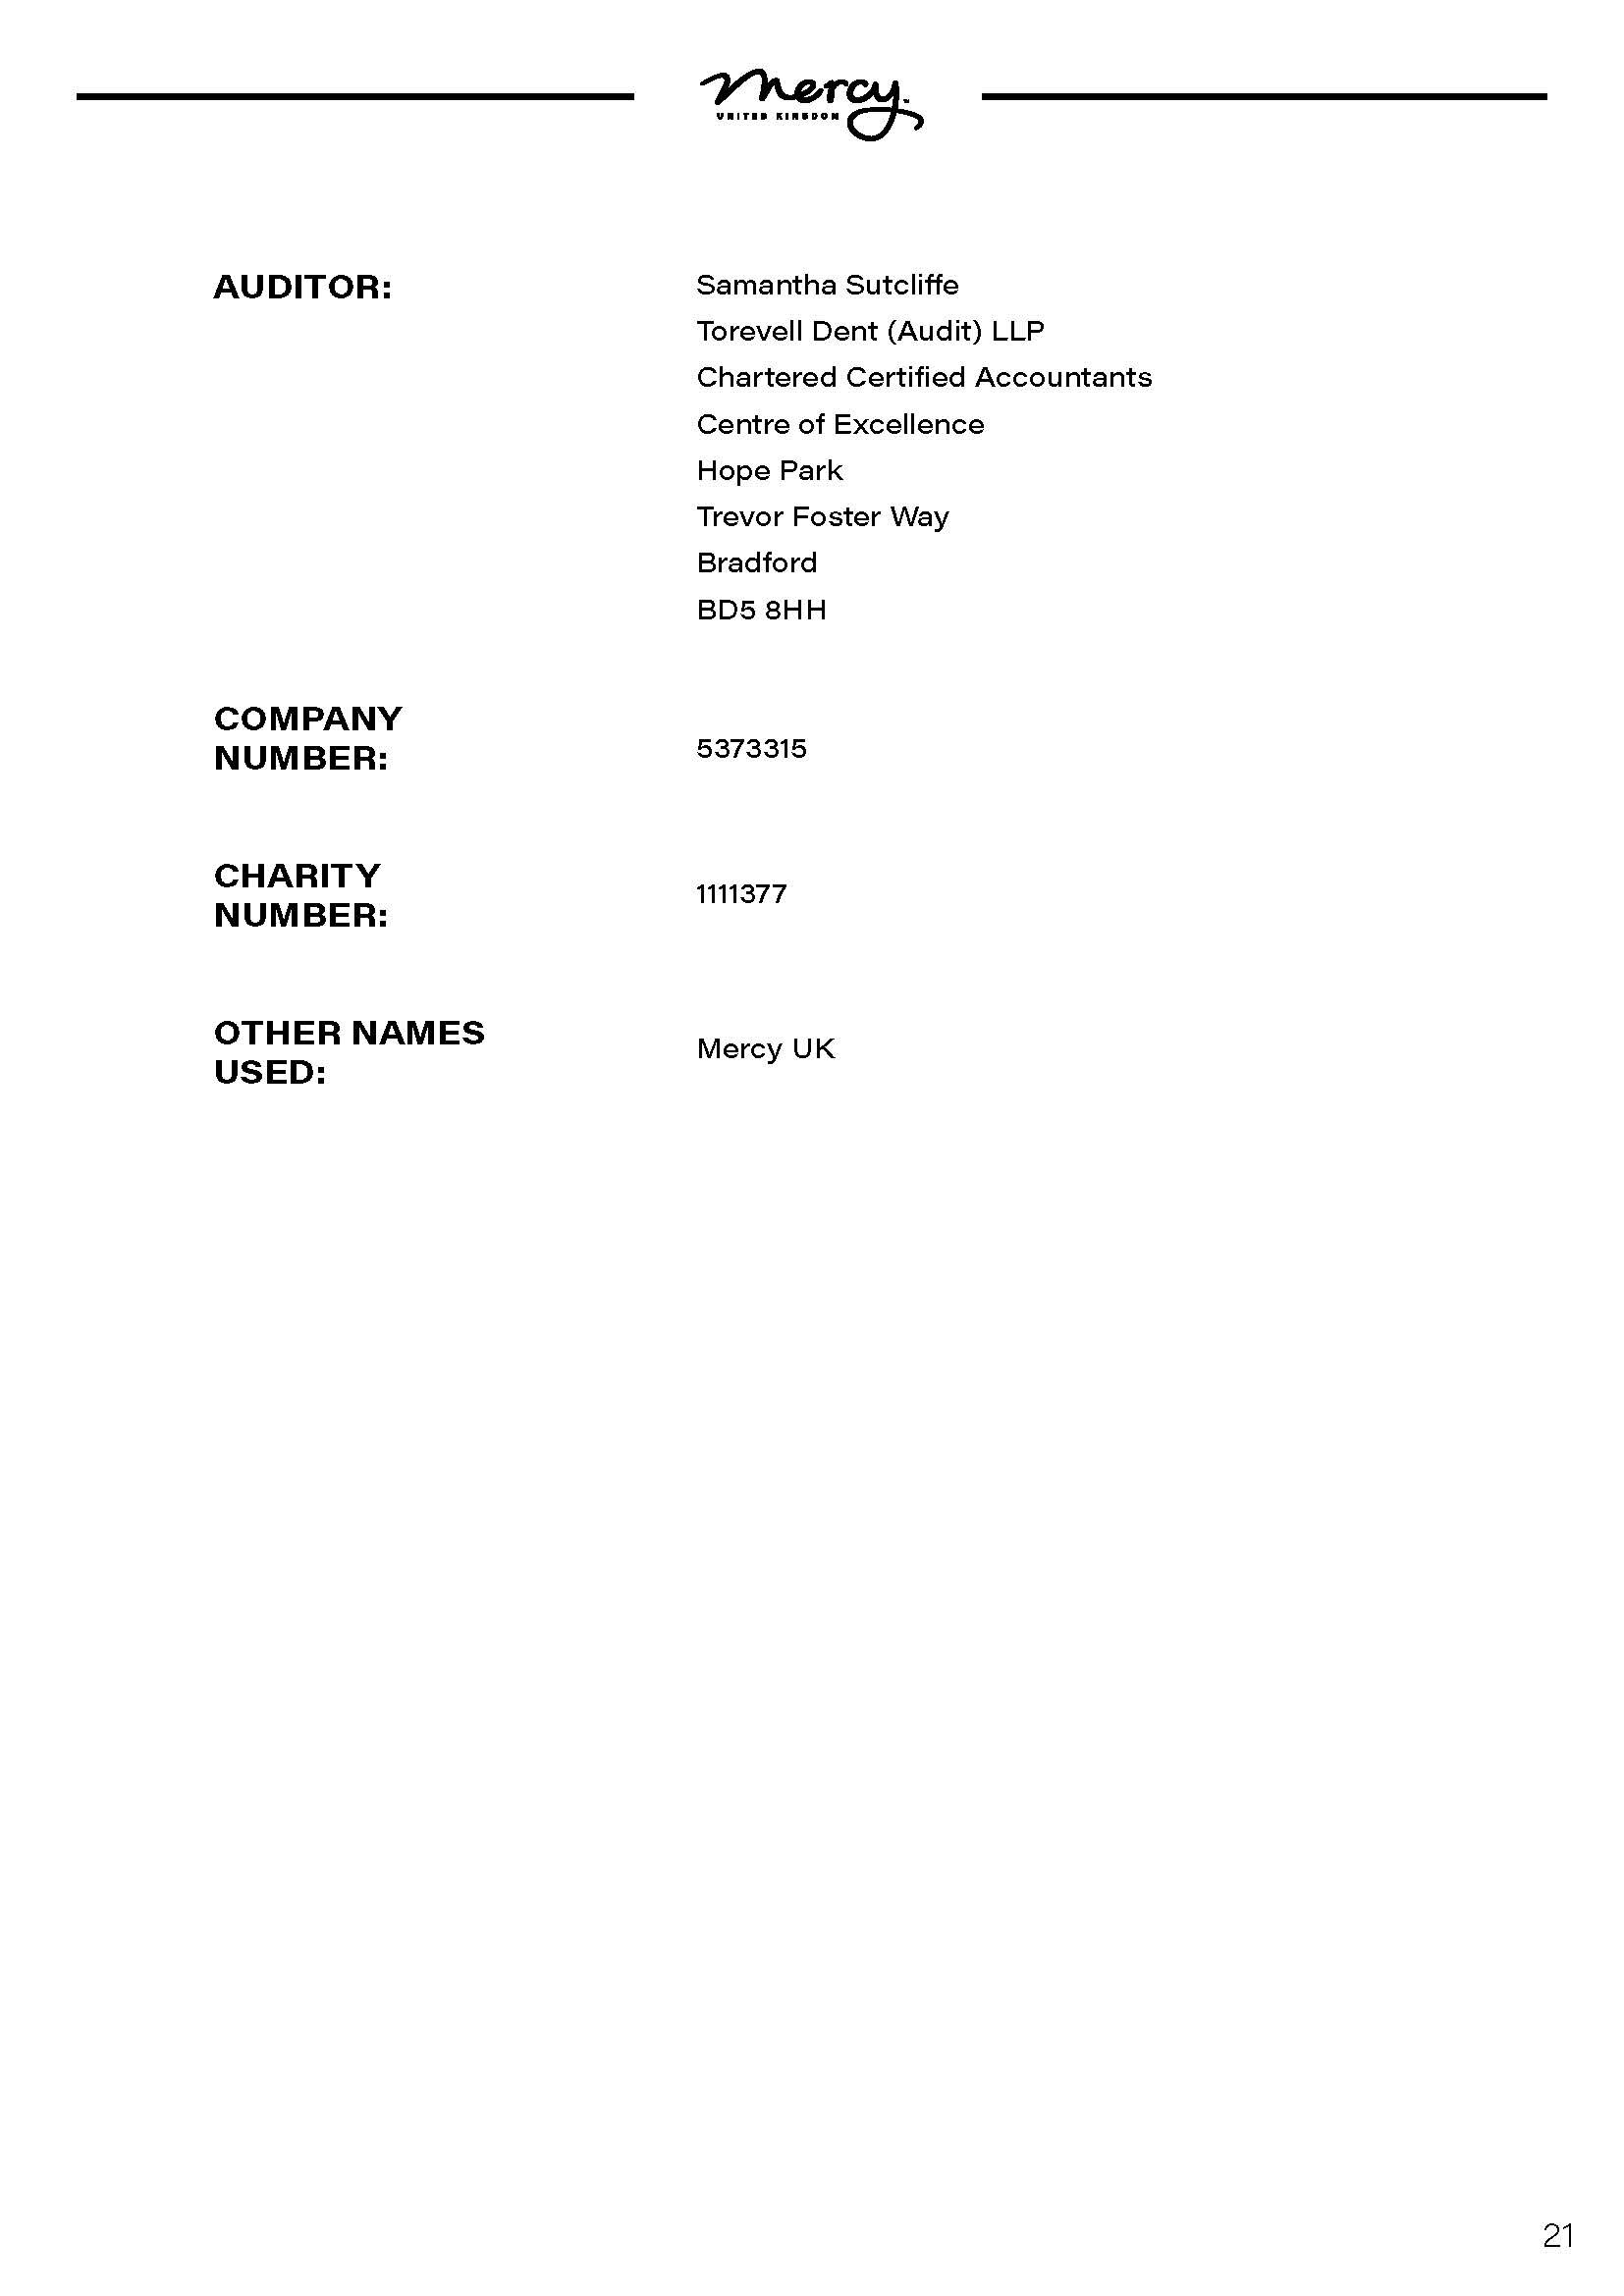 Trustee Report_Amends Page 1_Page_21.jpg